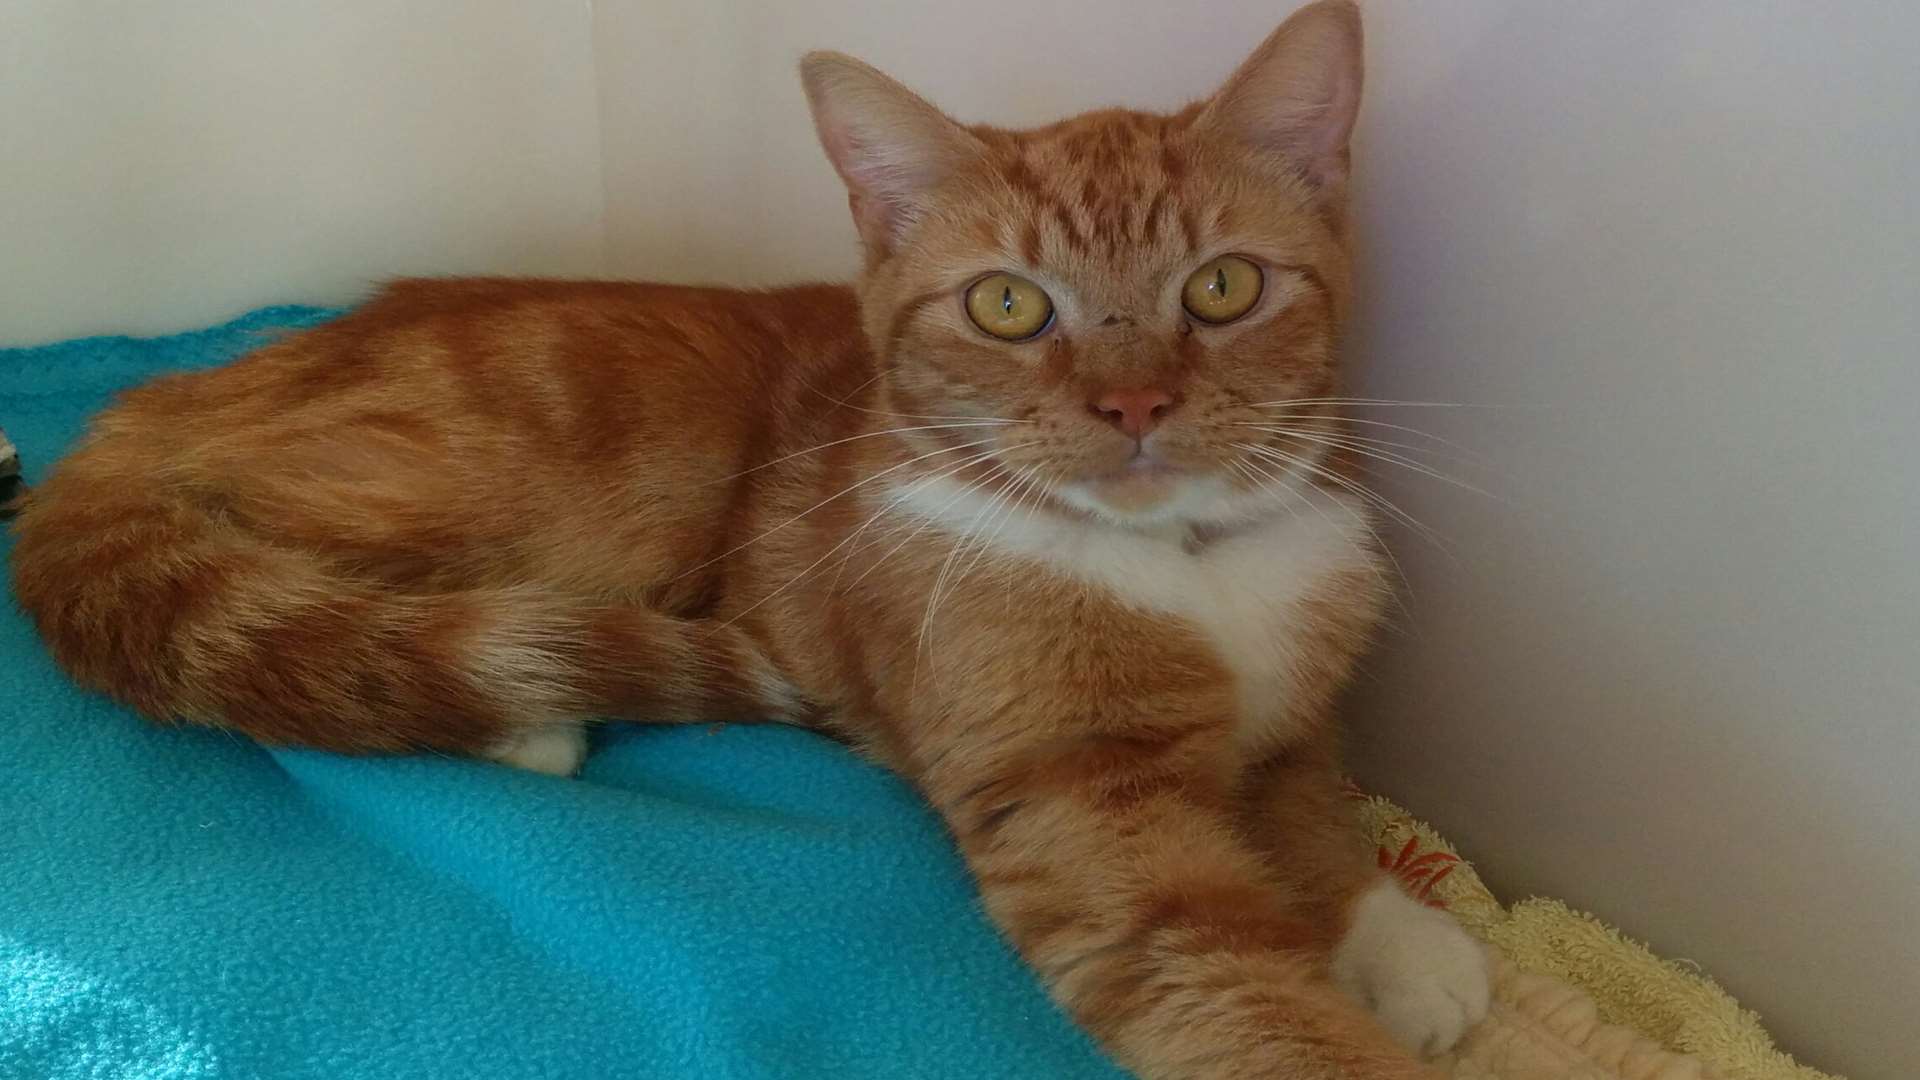 The ginger cat, Noel, was also saved from the floor cavity